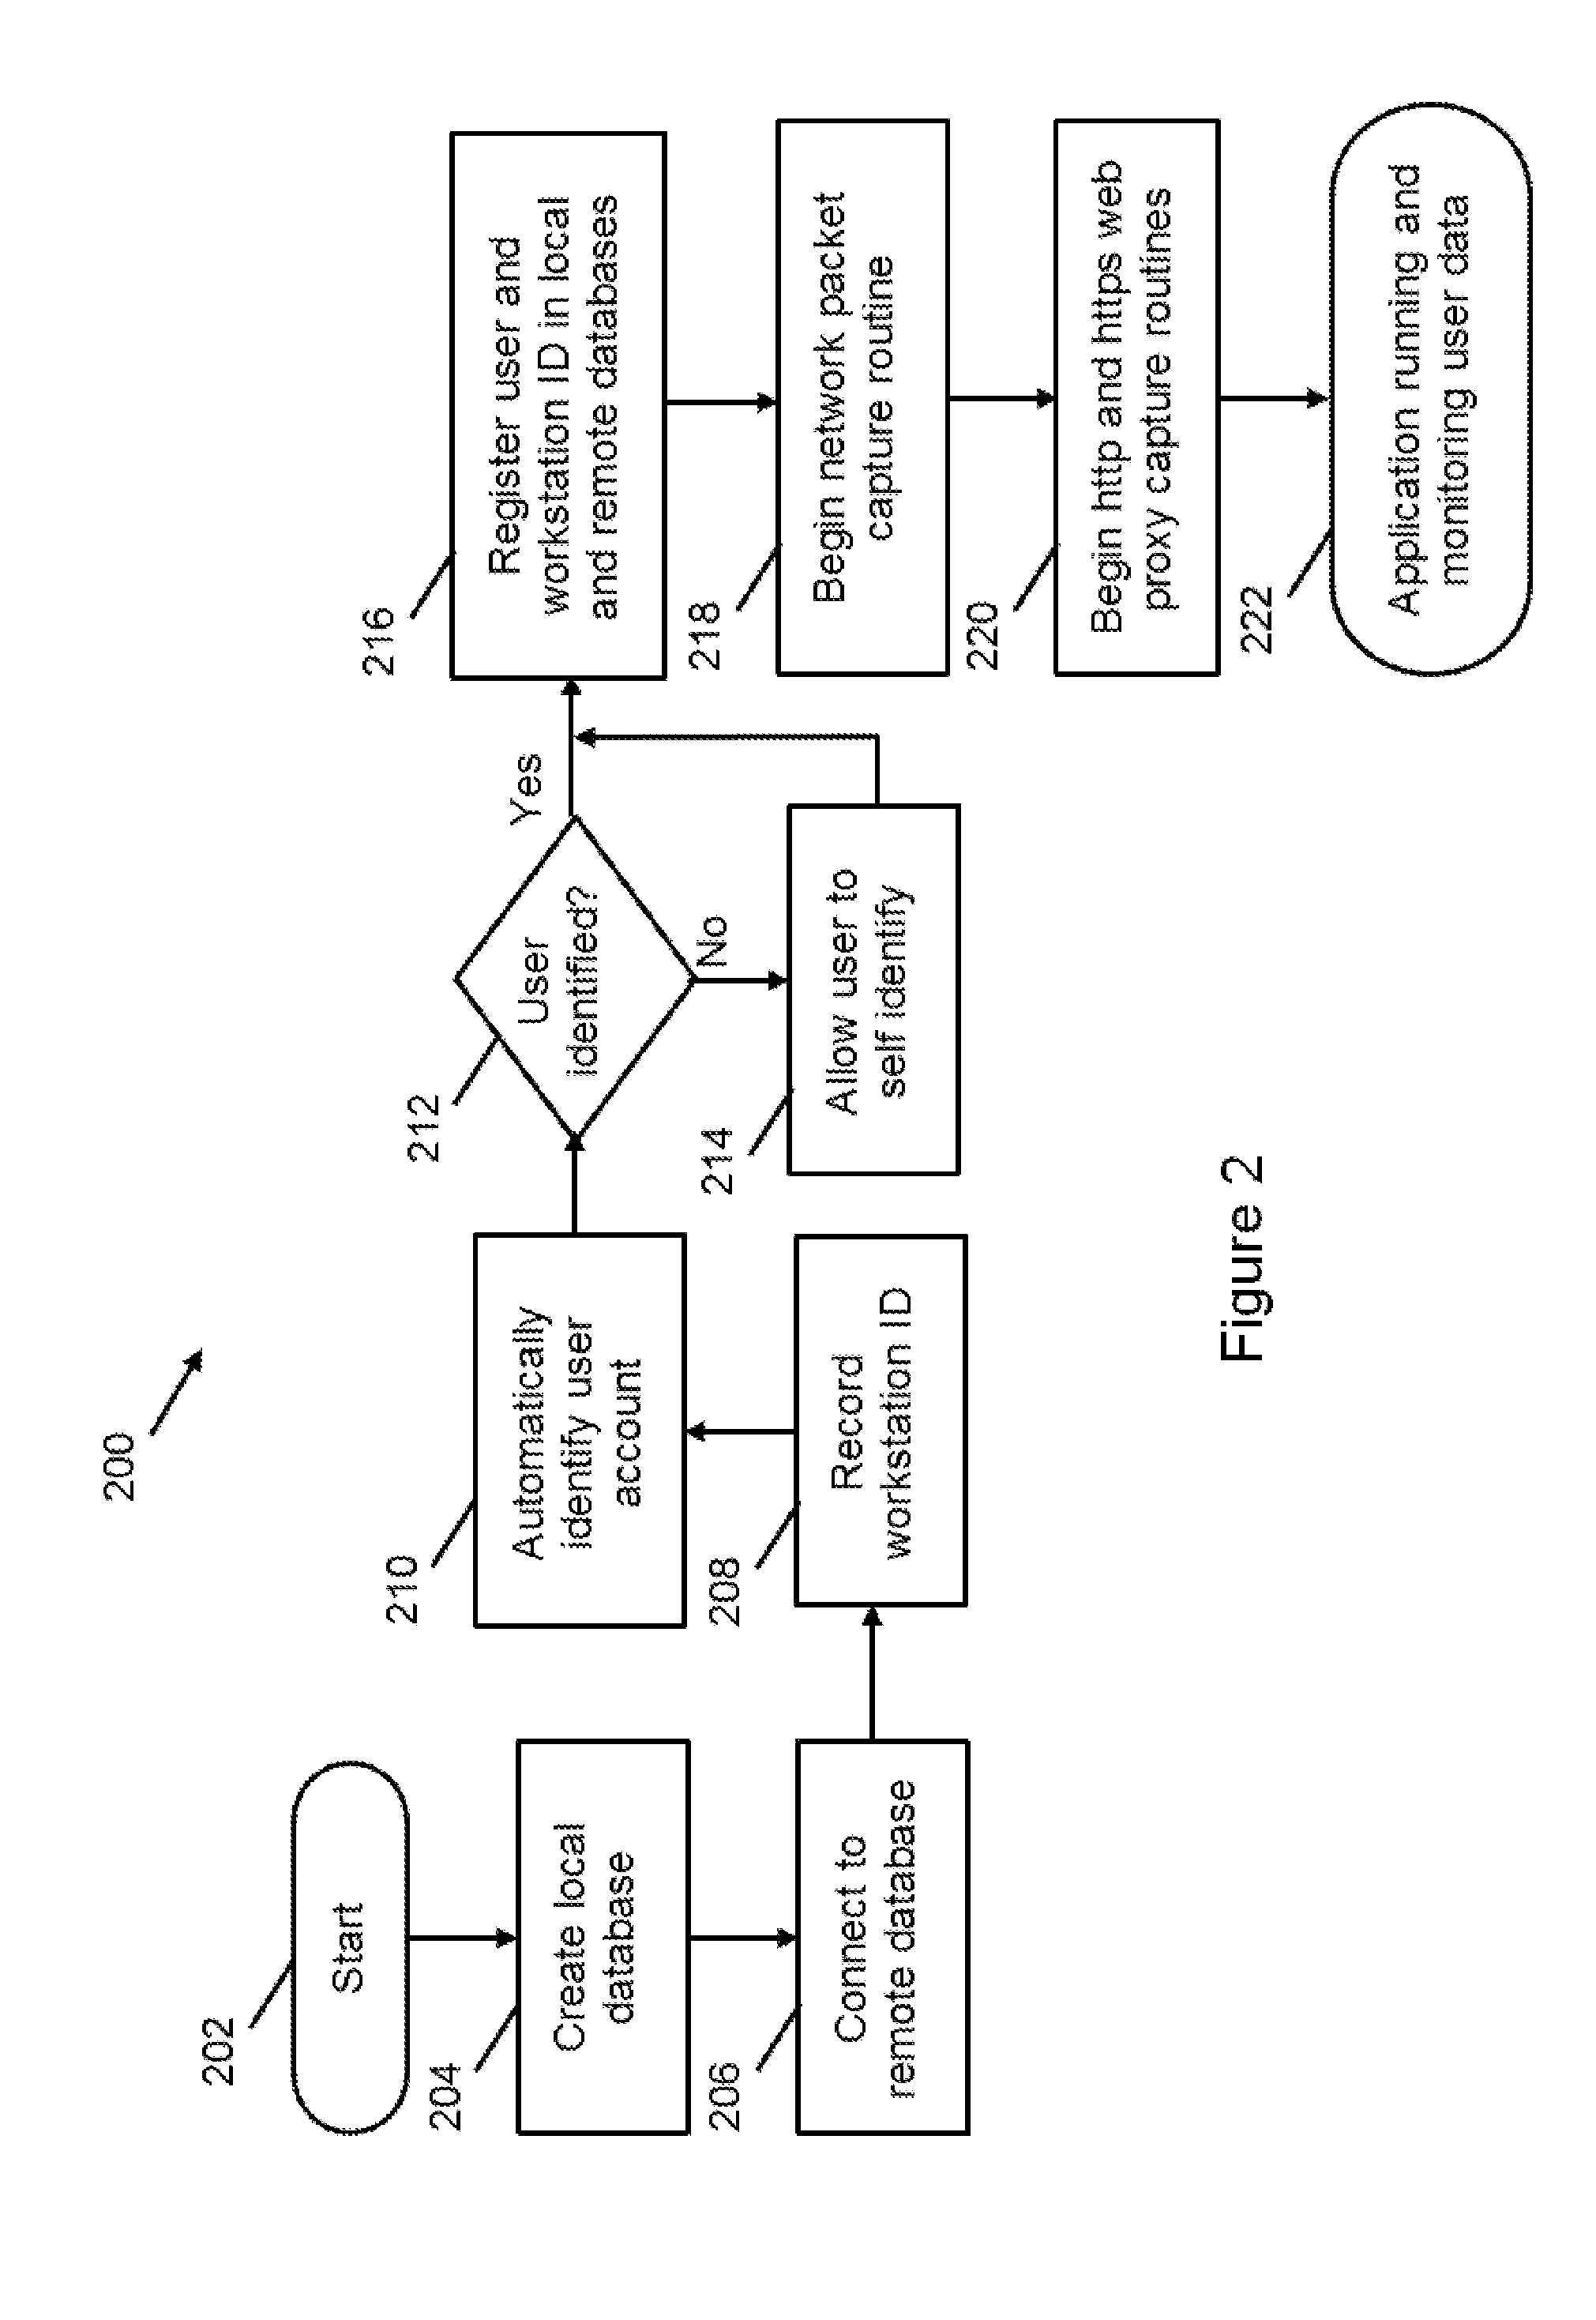 Relative value unit monitoring system and method